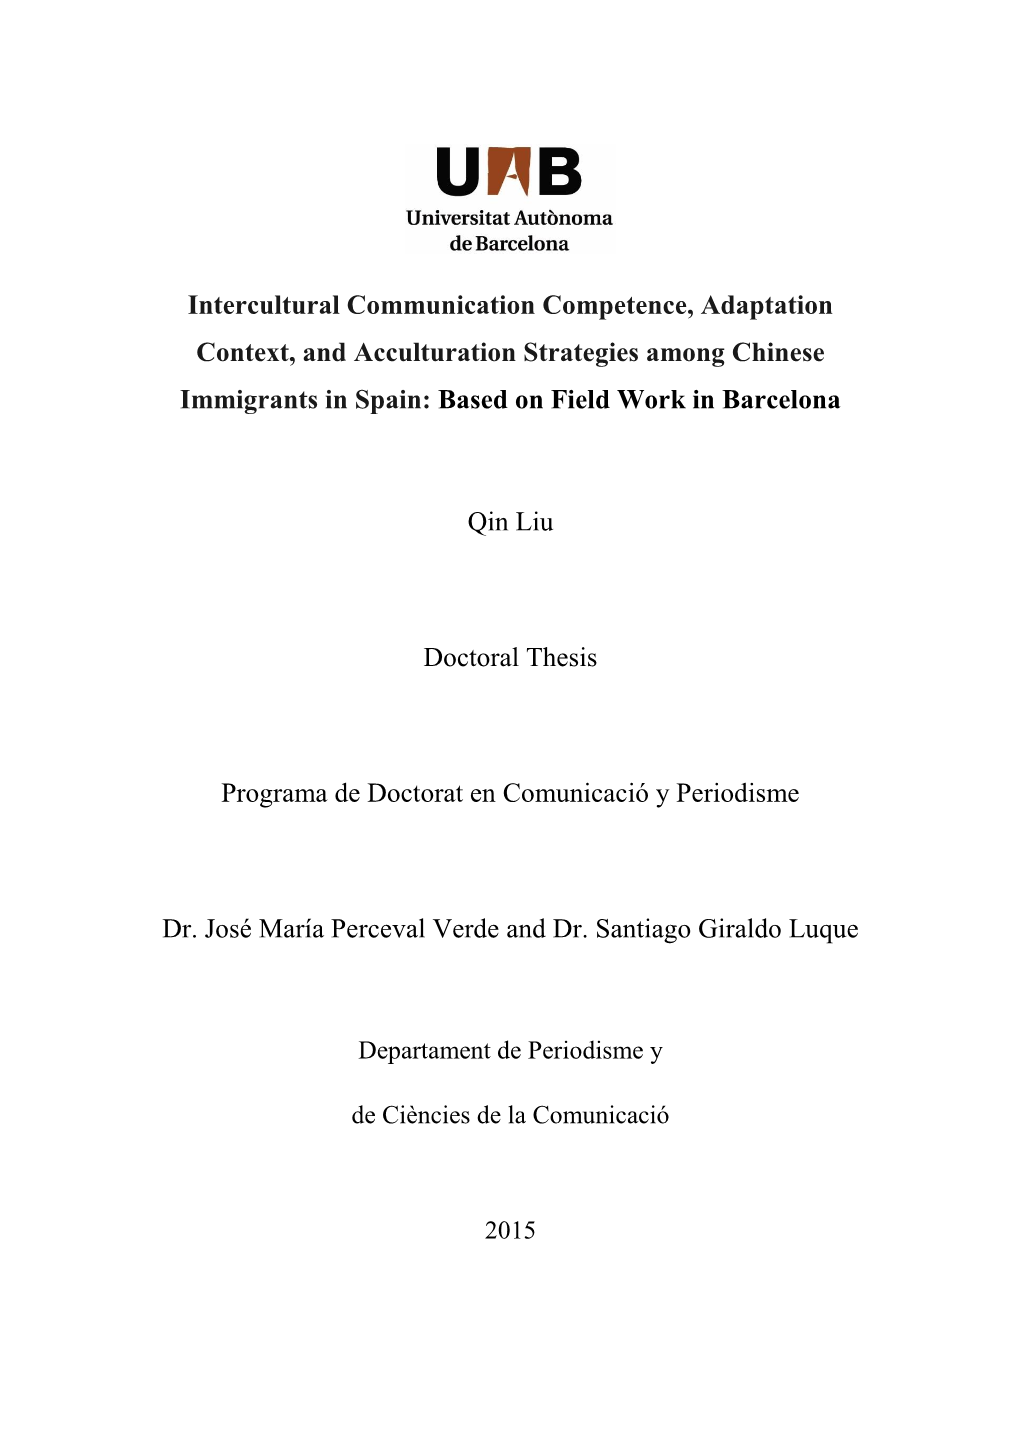 Intercultural Communication Competence, Adaptation Context, and Acculturation Strategies Among Chinese Immigrants in Spain: Based on Field Work in Barcelona